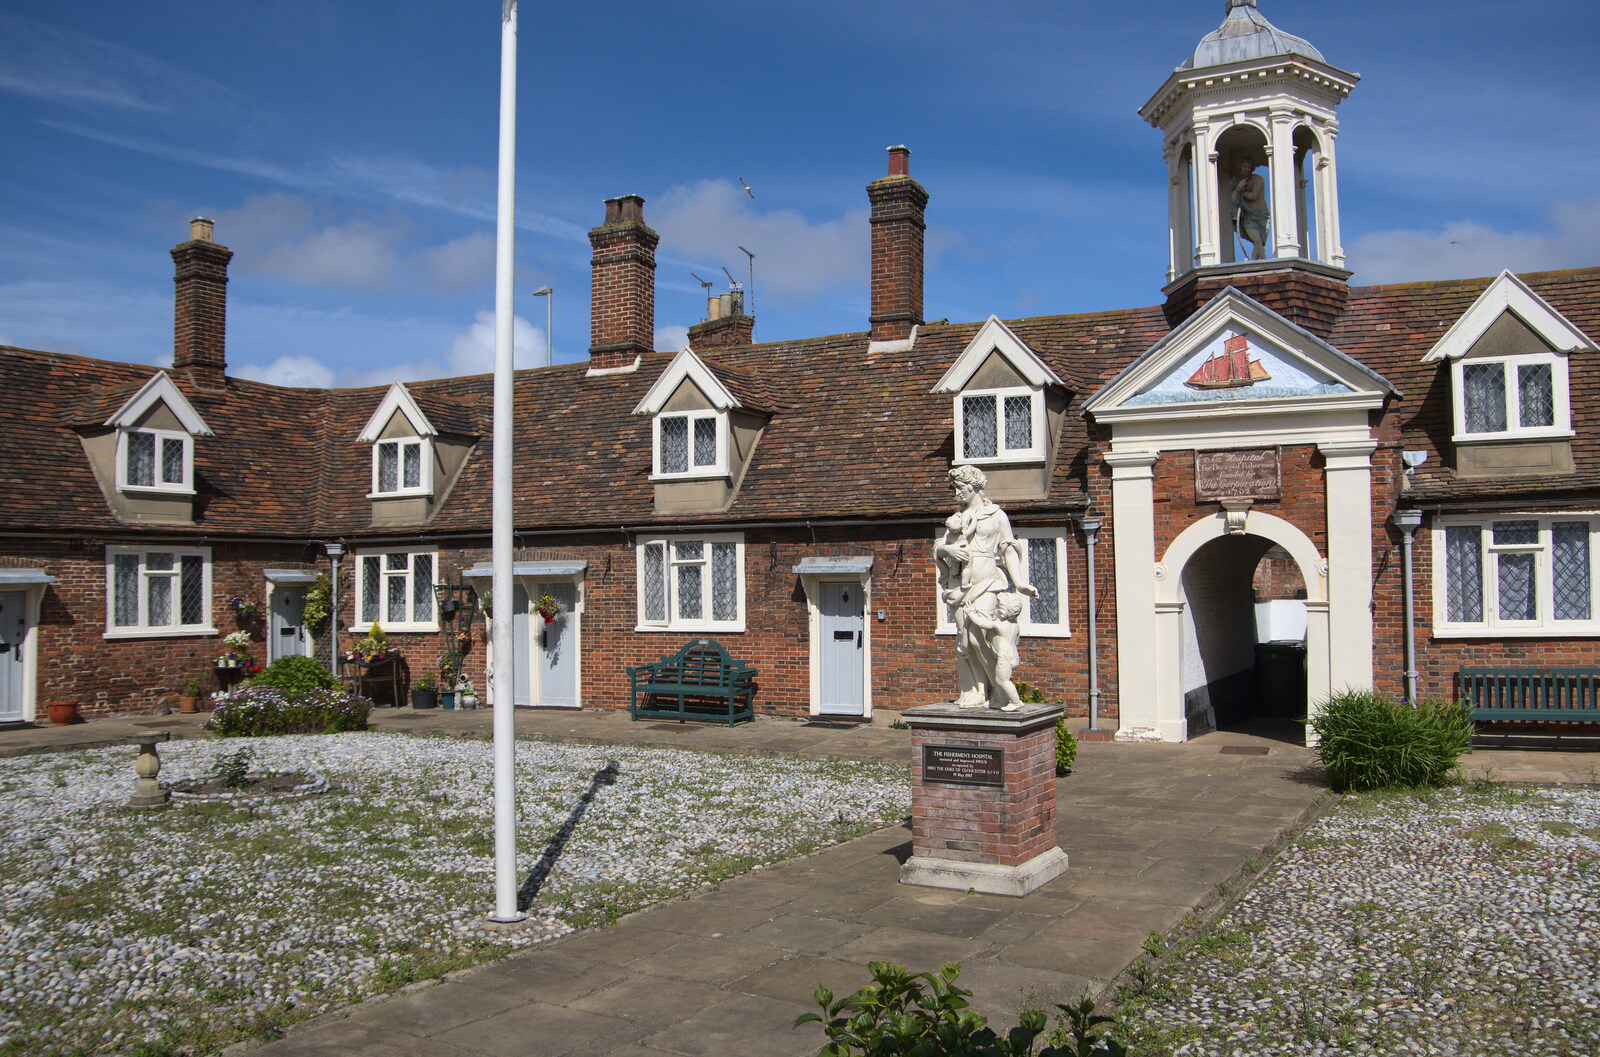 The pretty Fishermen's Hospital, built in 1706 from Faded Seaside Glamour: A Weekend in Great Yarmouth, Norfolk - 29th May 2022